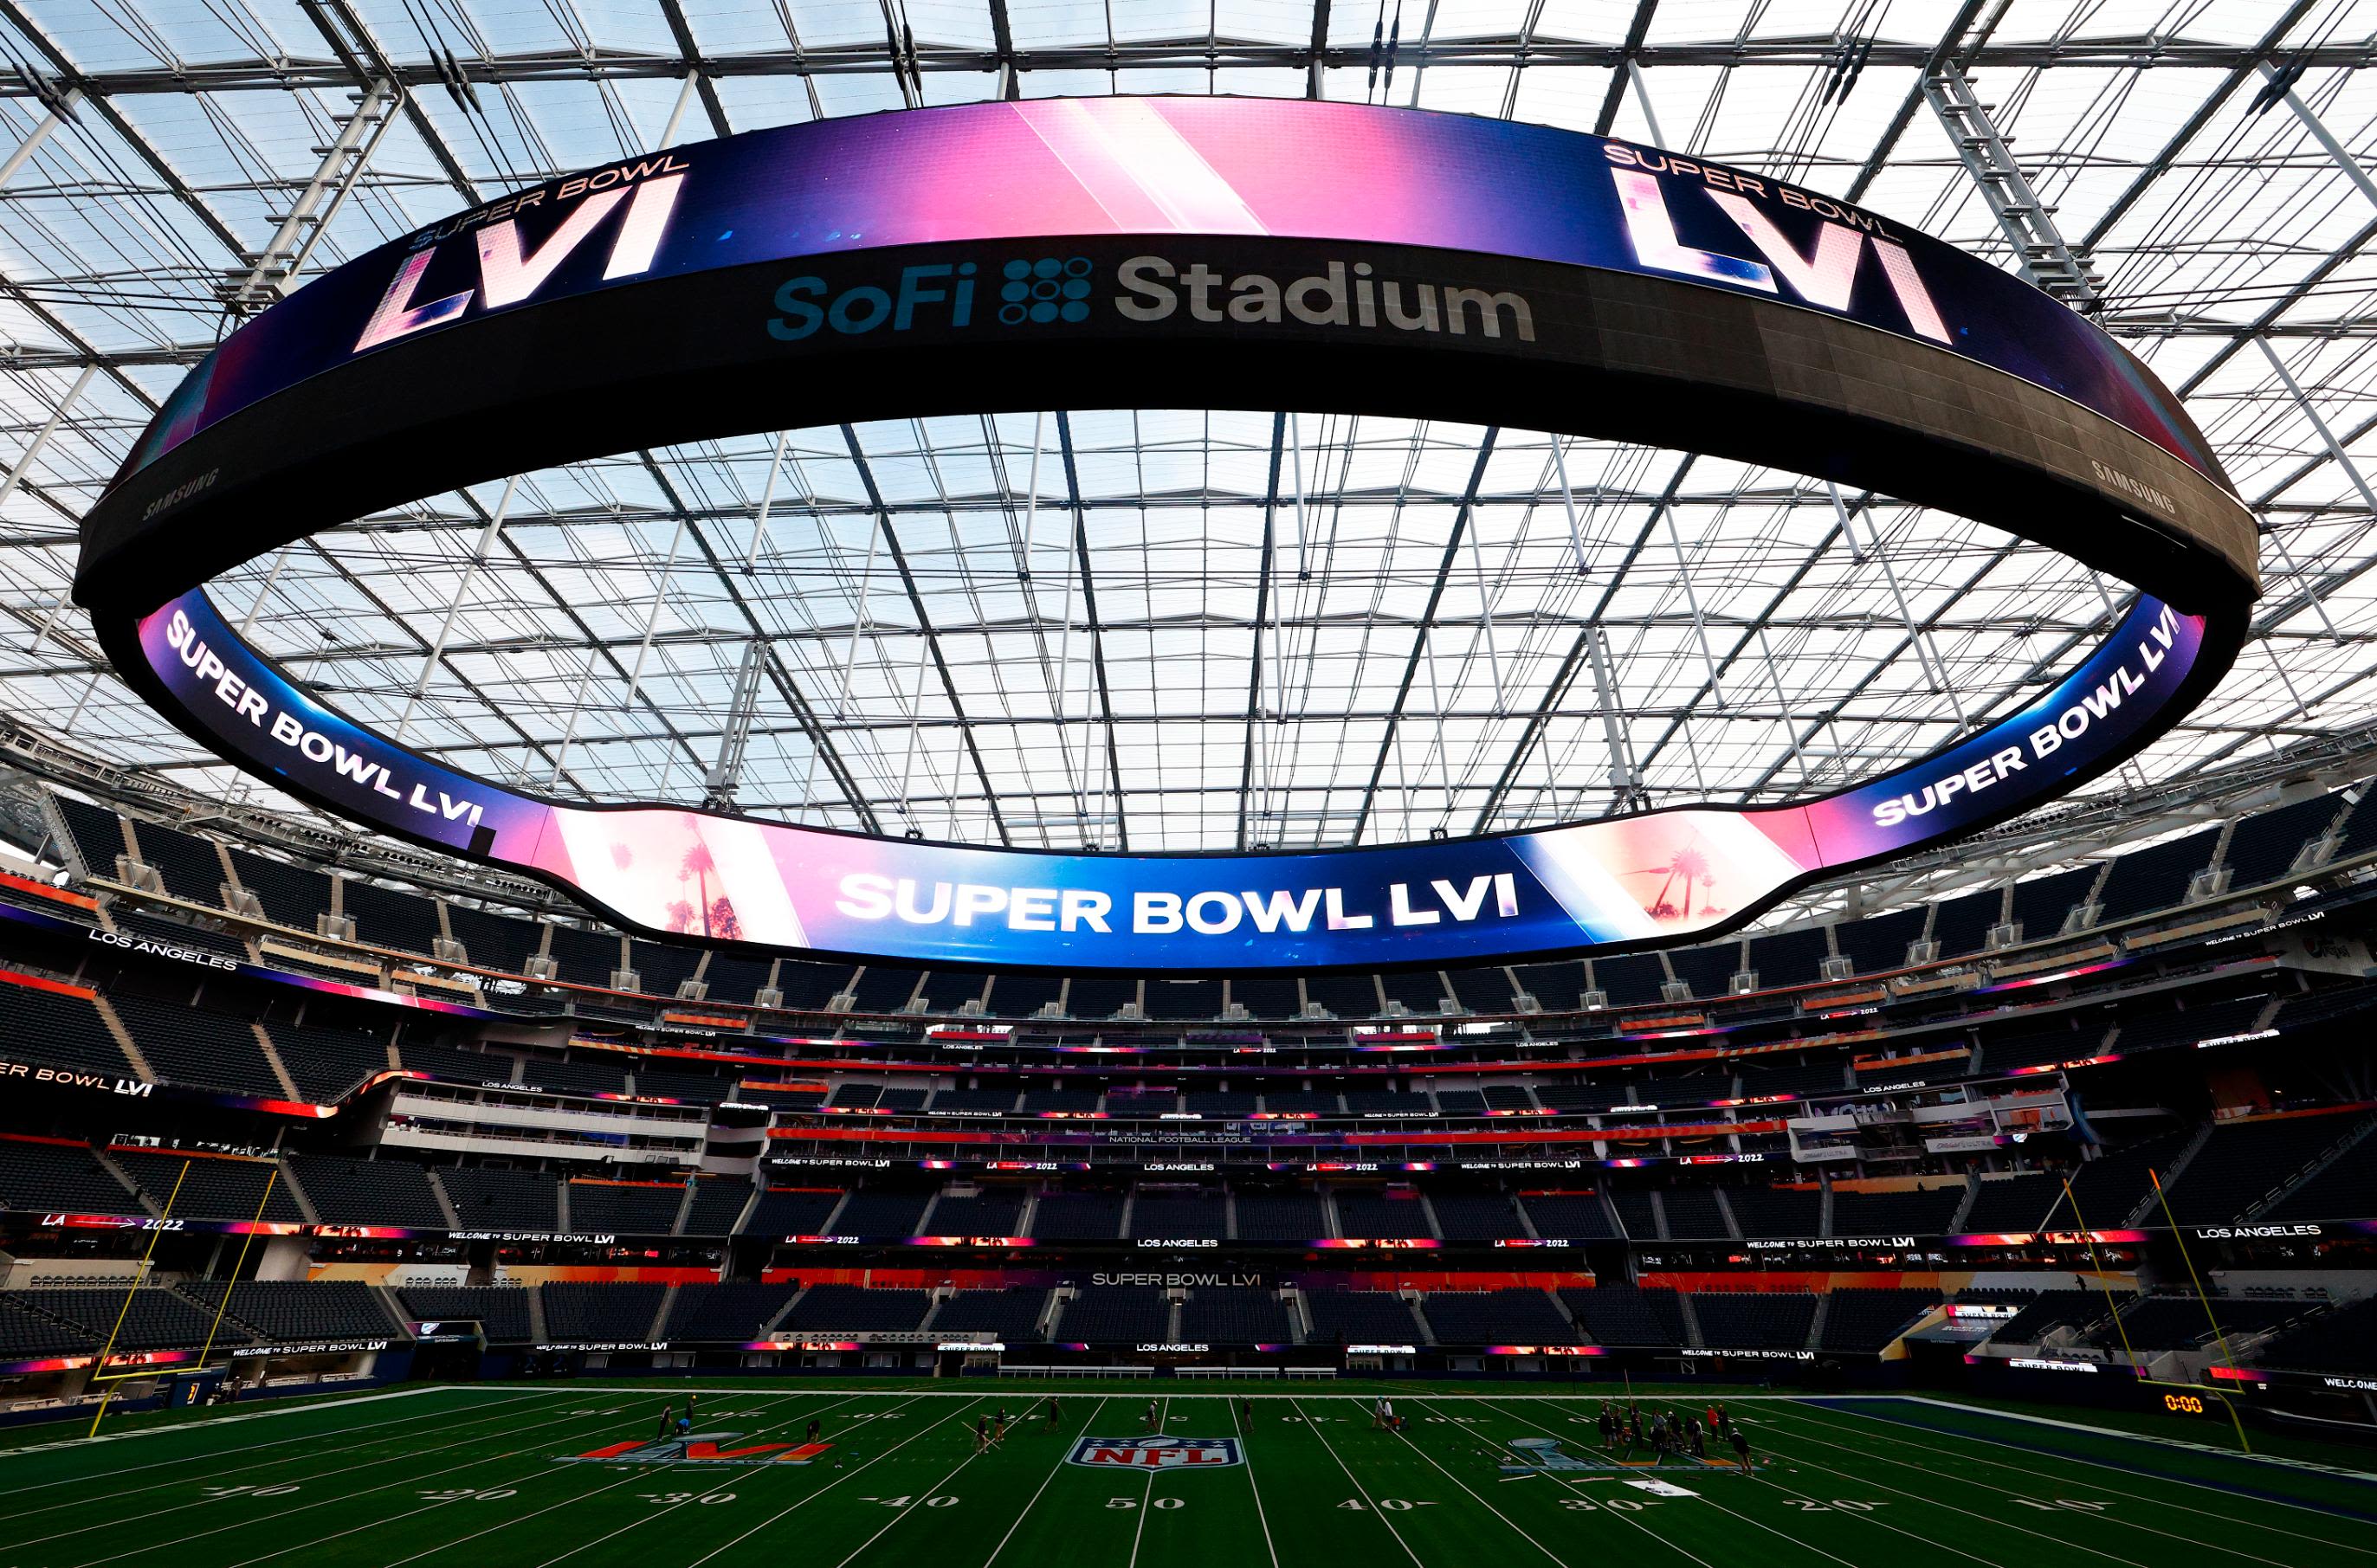 How to watch the Super Bowl live: Start time, channels and other